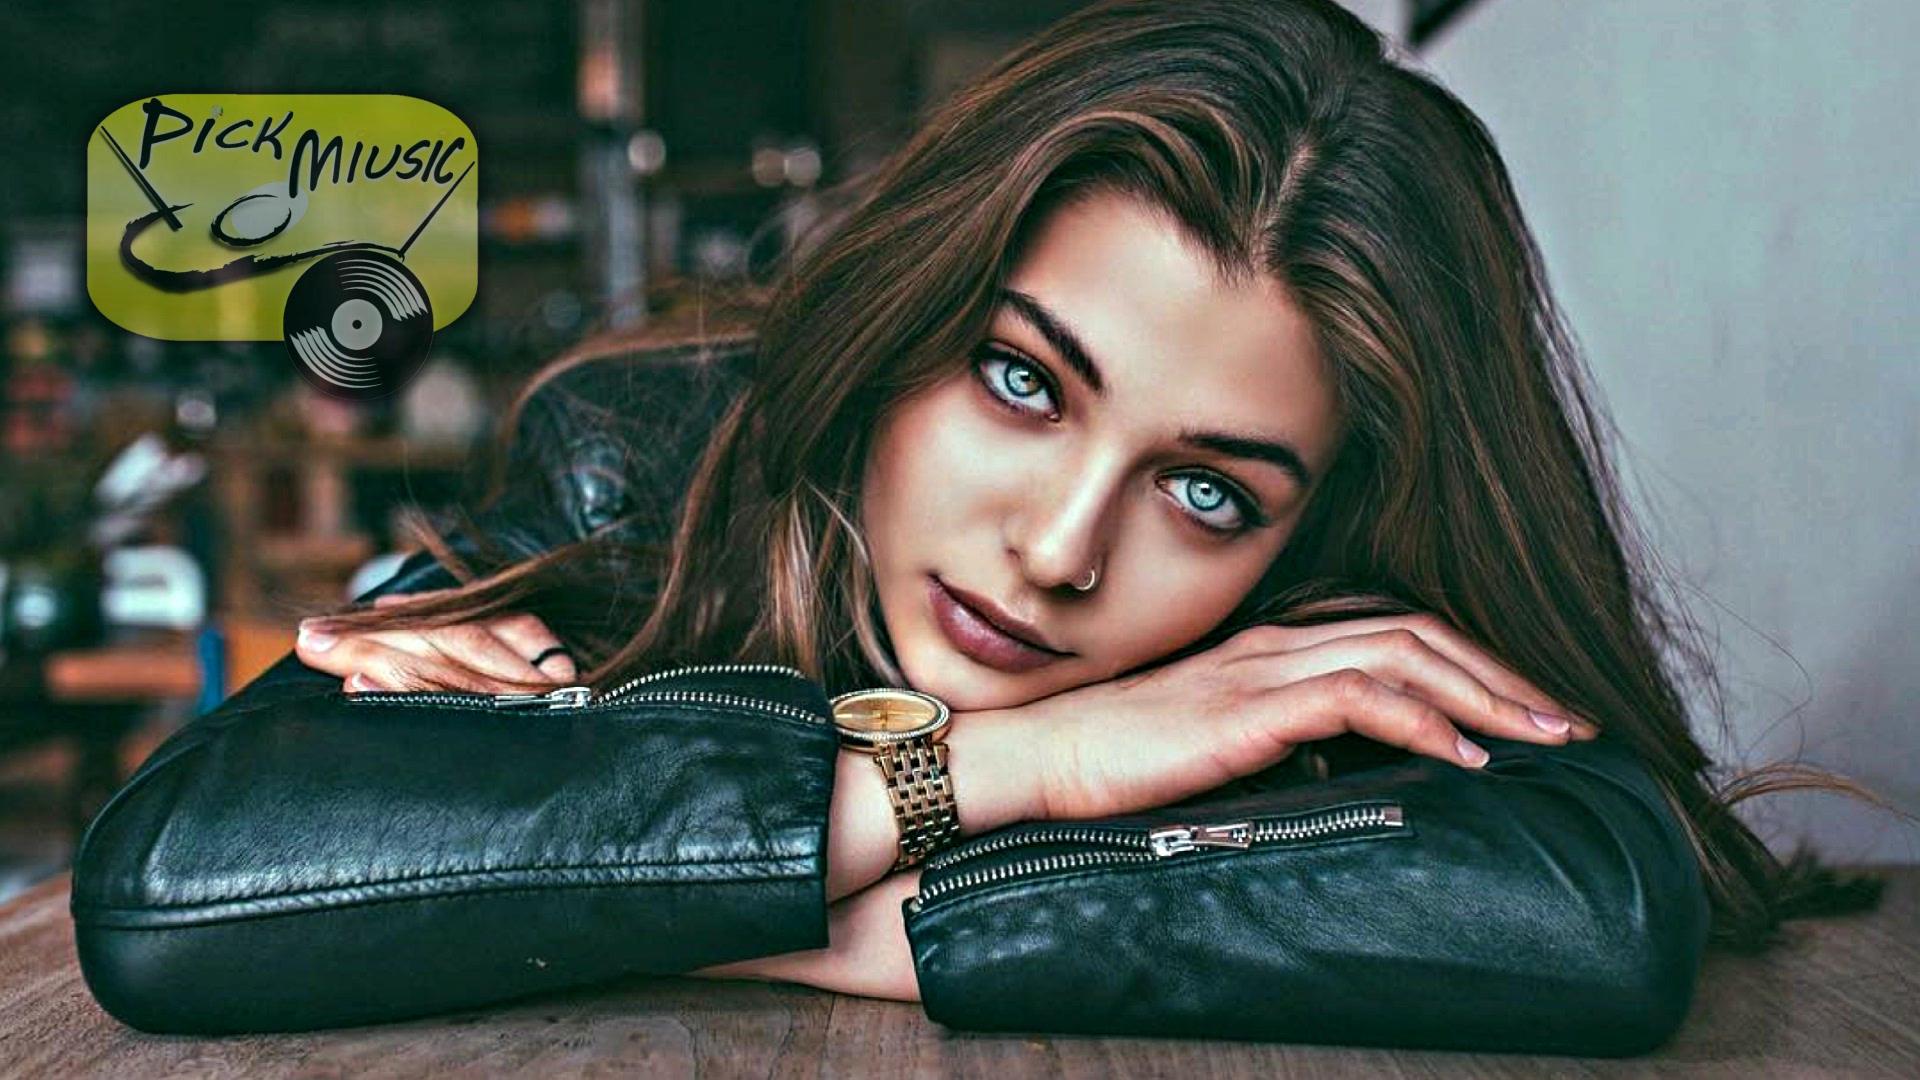 pick.miusic steemit ONE HOUR Relaxing Instrumental House music  Study and Concentration.jpg